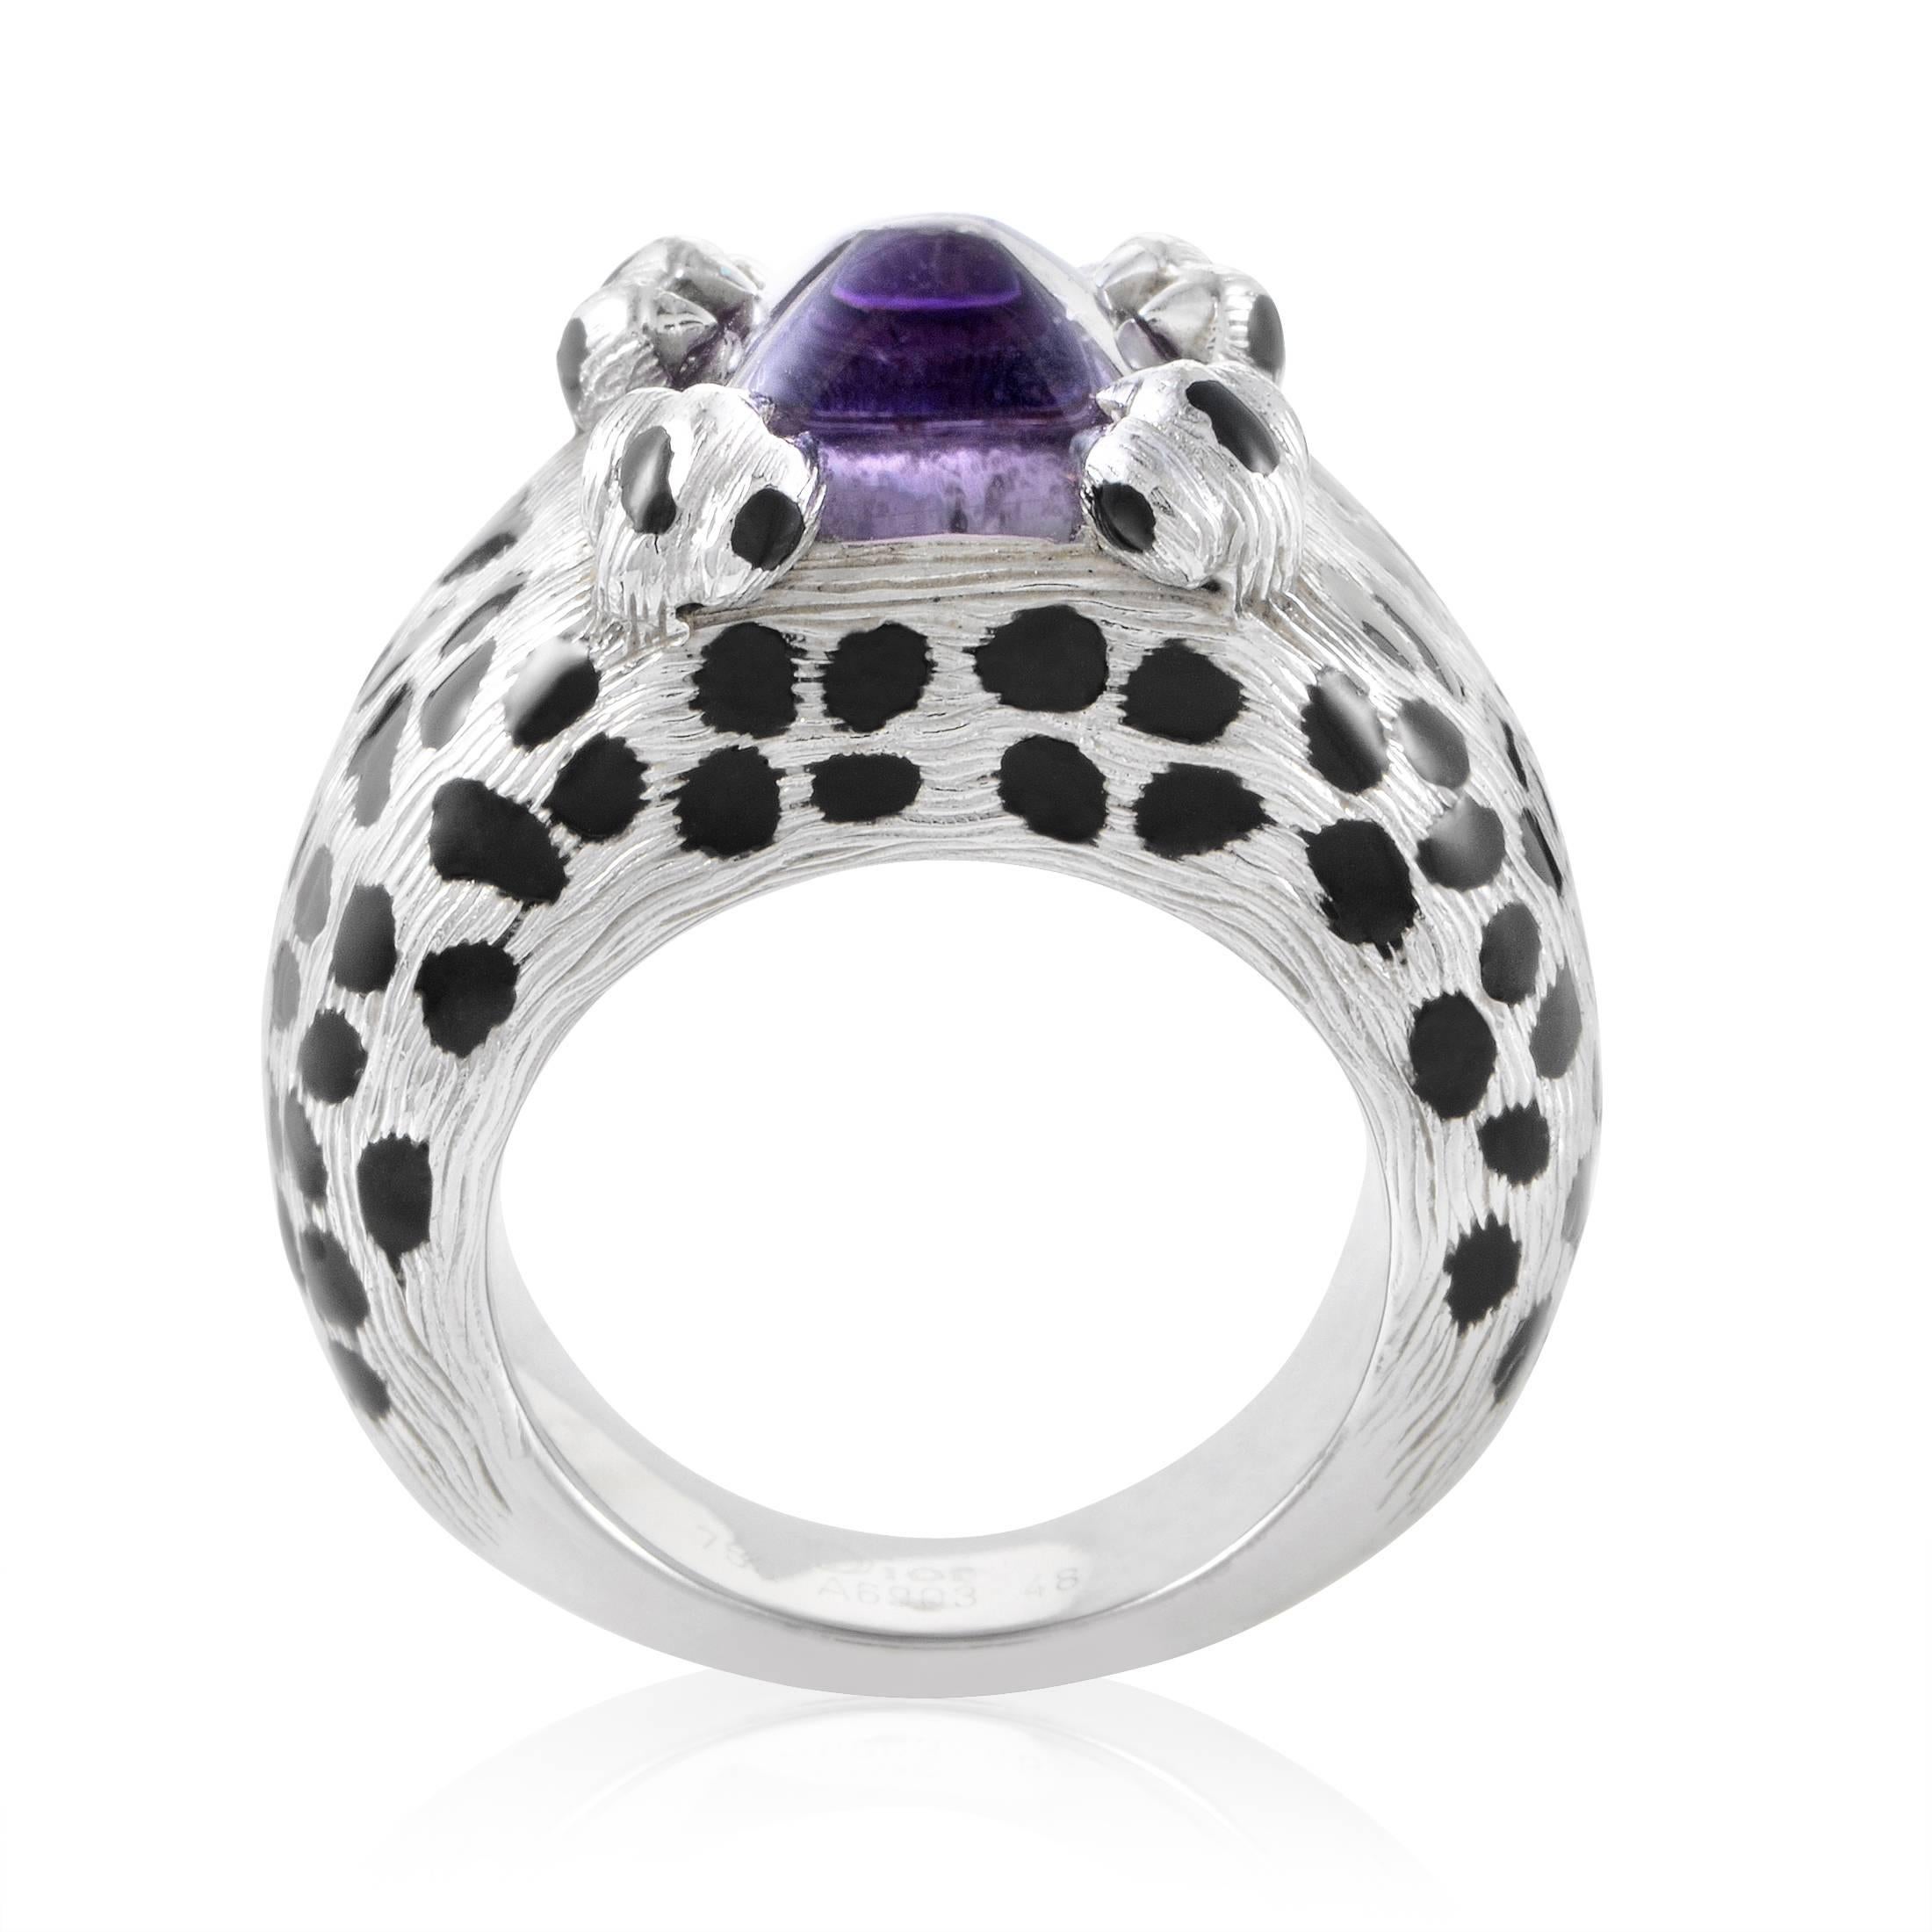 Boasting striking black enamel that creates a fascinating pattern against the intricately finished surface of 18K white gold, this stunning ring from Dior is topped off by a gorgeous amethyst for an enchanting look. Ring Top Dimensions: 20 x 12mm.